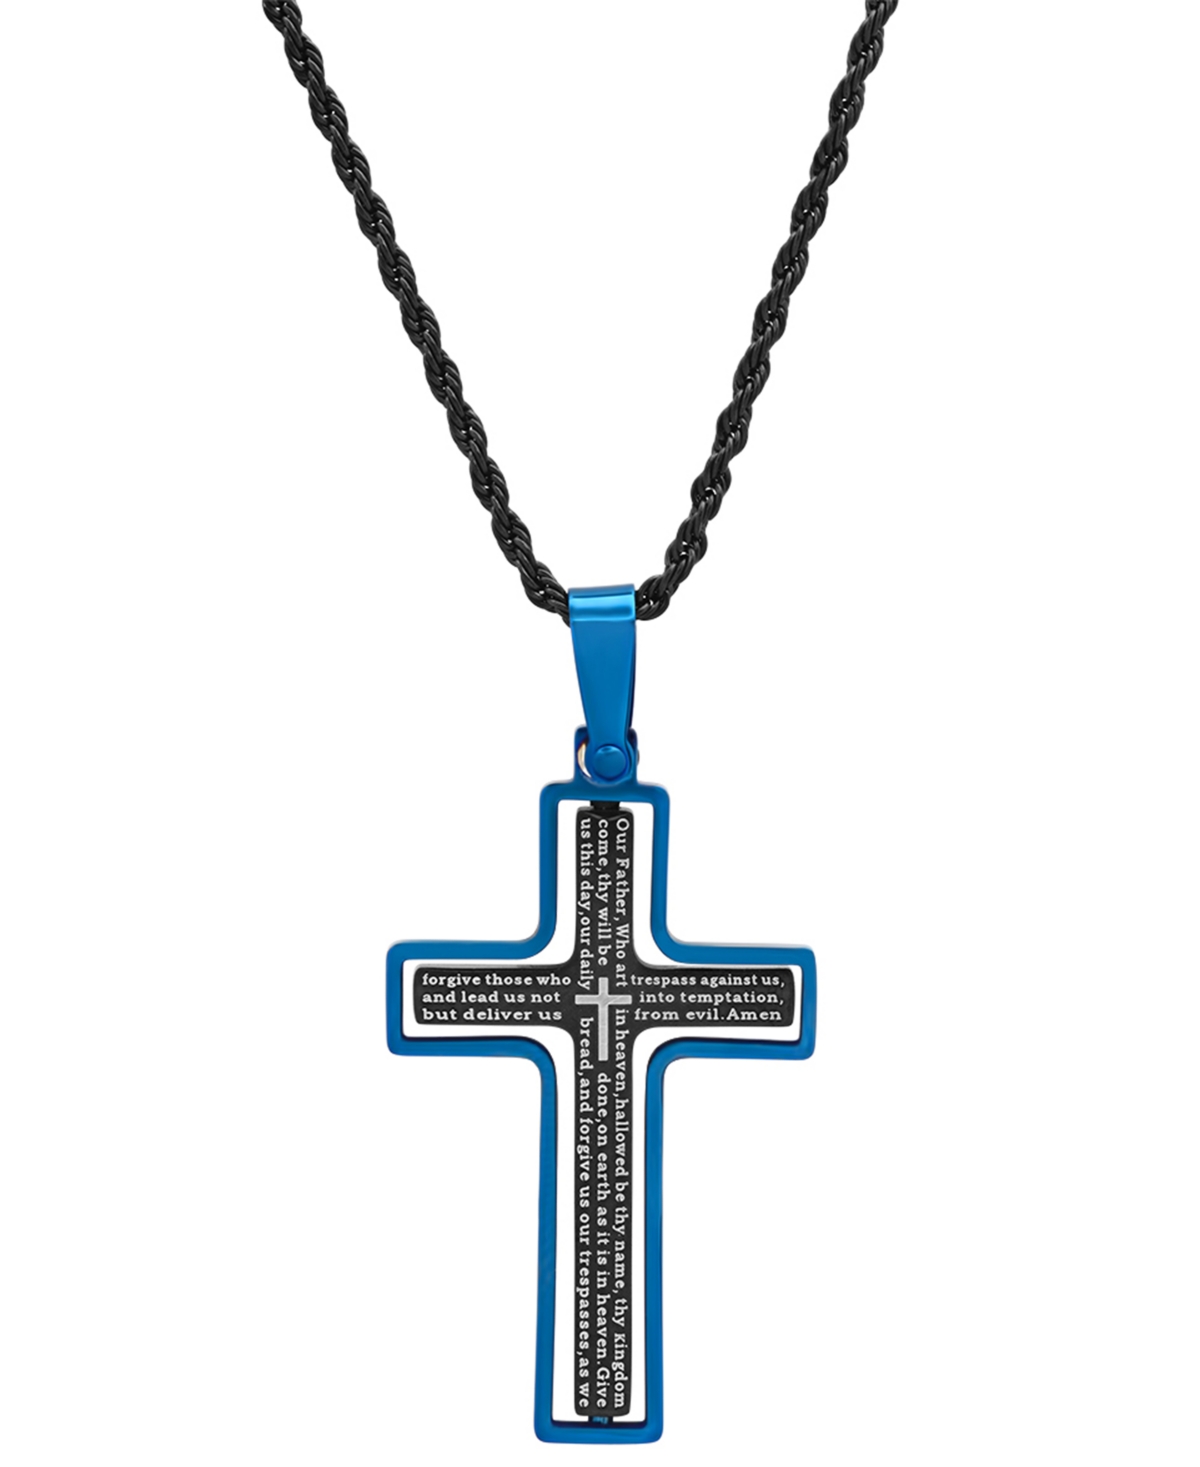 Men's Two-Tone Stainless Steel "Our Father" English Prayer Spinner Cross 24" Pendant Necklace - Black, Silver